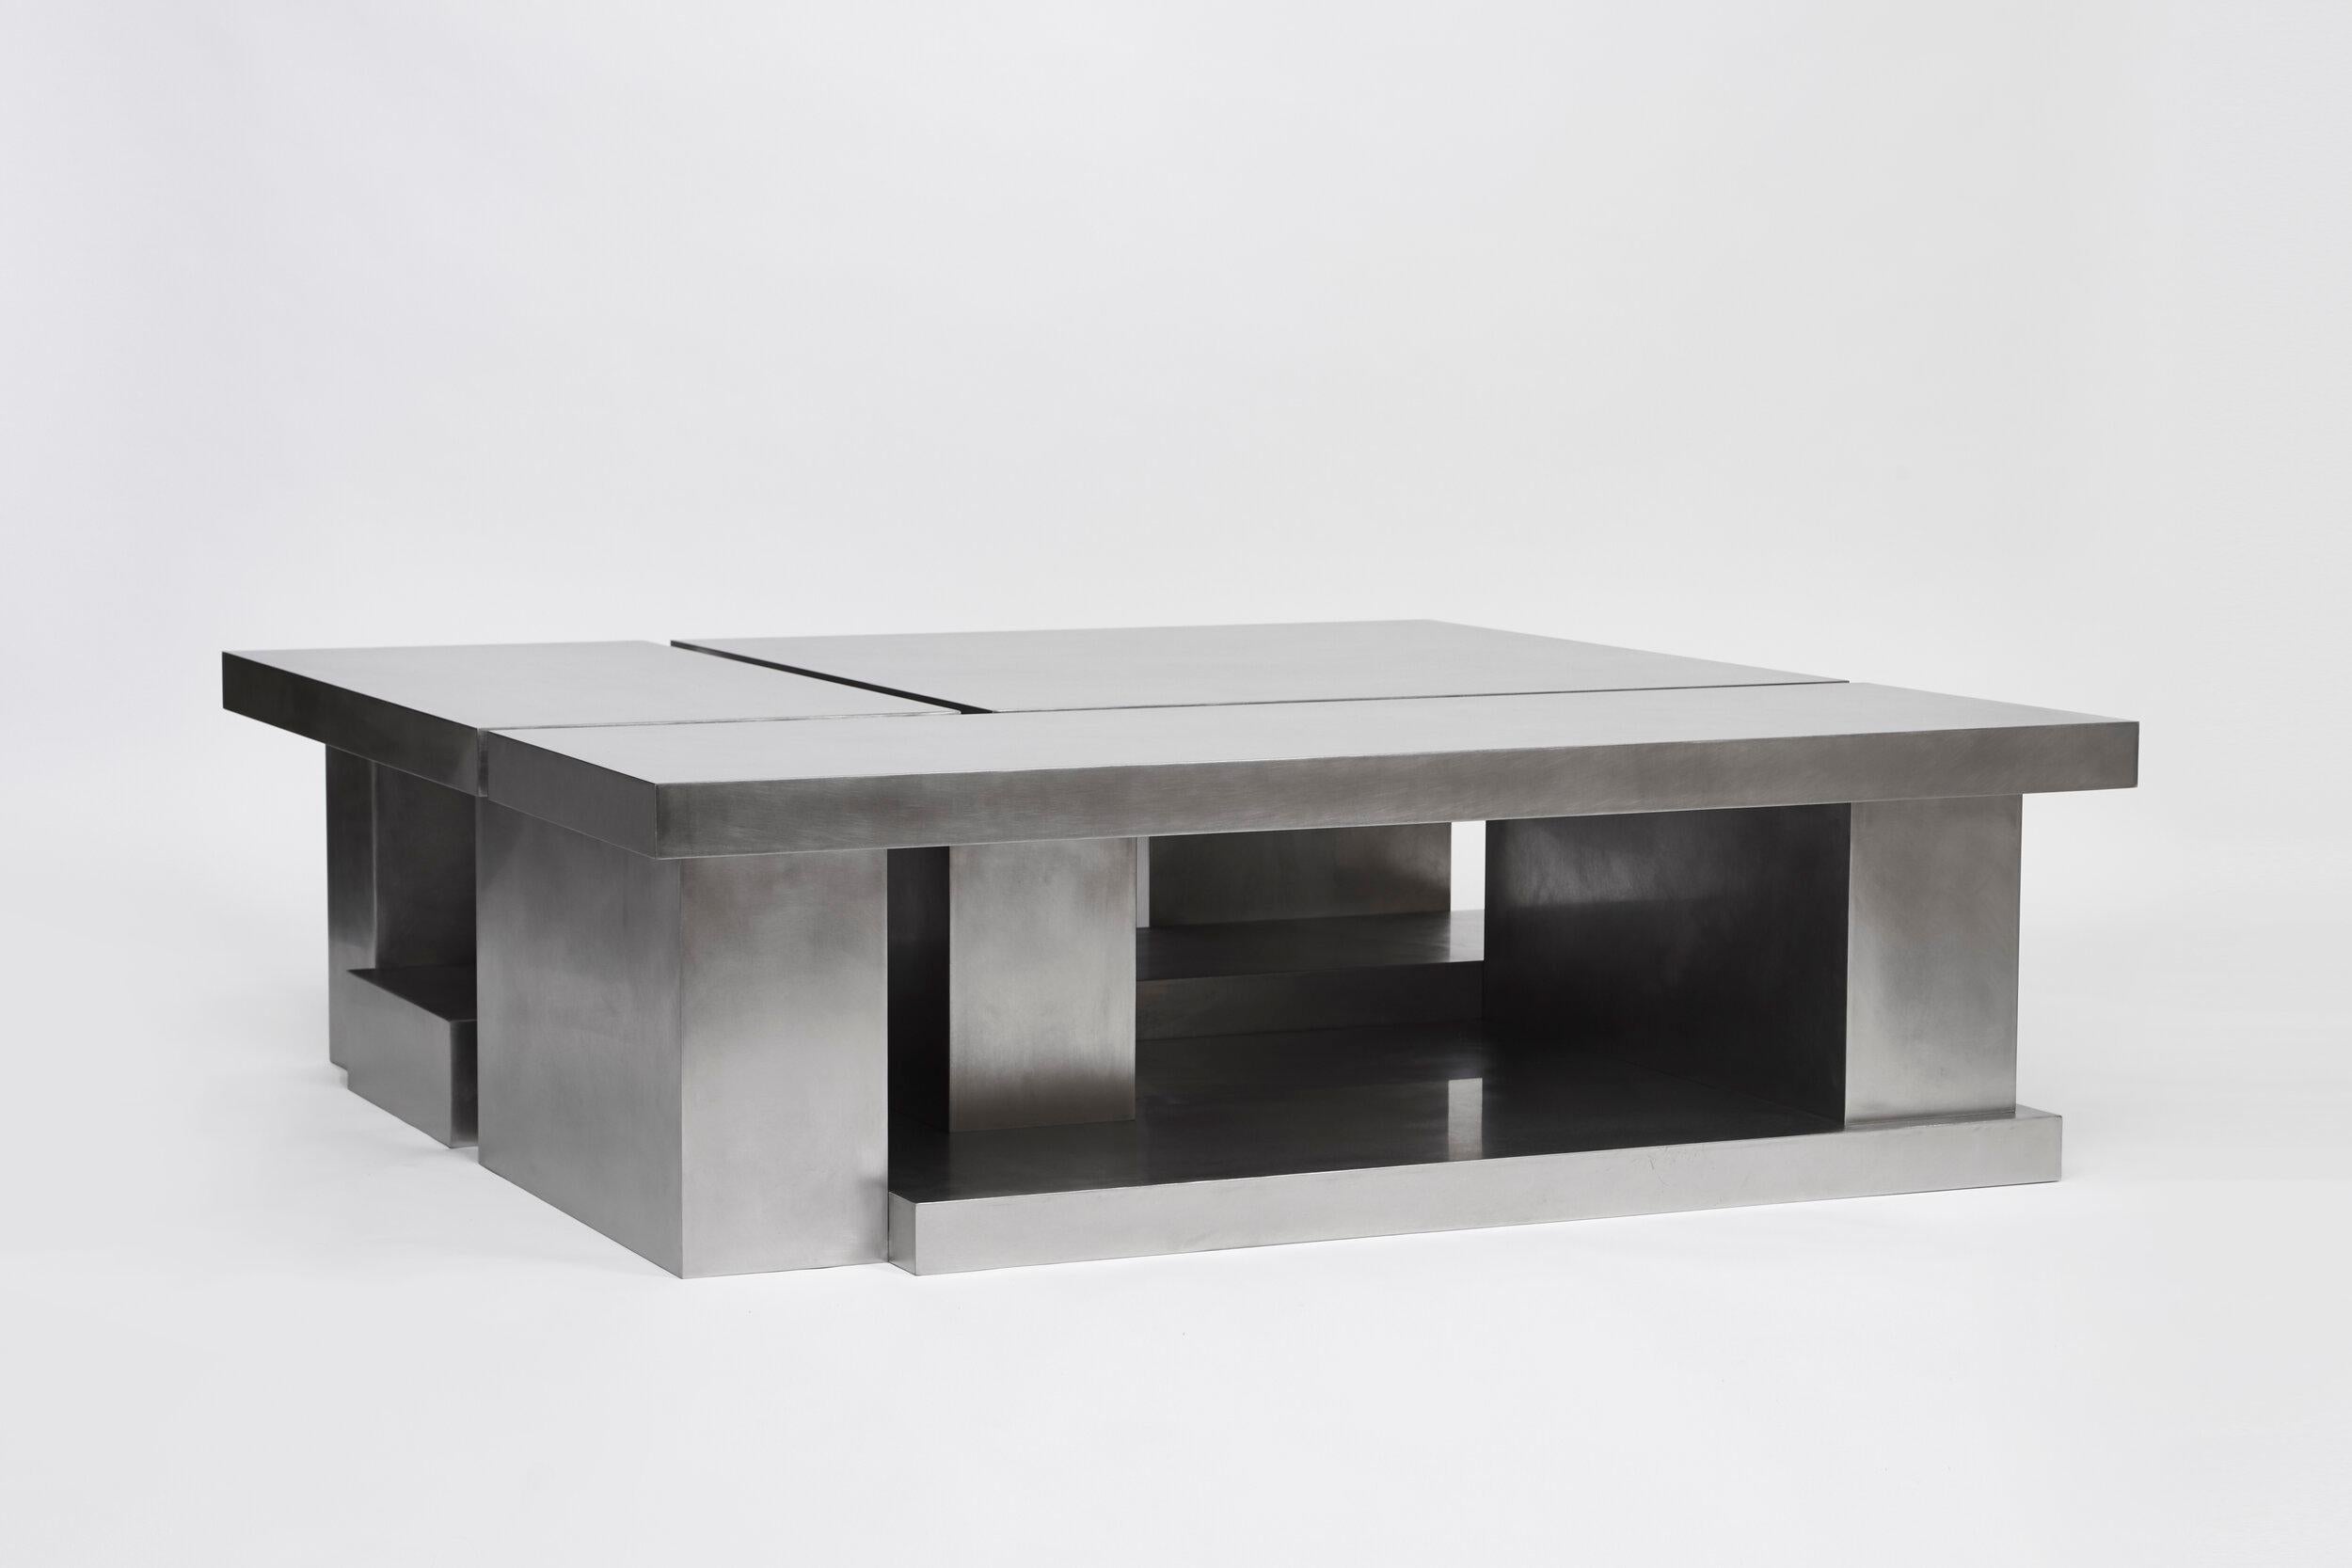 Layered steel coffee table I by Hyungshin Hwang
Dimensions: D 138 x W 138 x H 42 cm
Materials: stainless steel

Layered Series is the main theme and concept of work of Hwang, who continues his experiment which is based on architectural